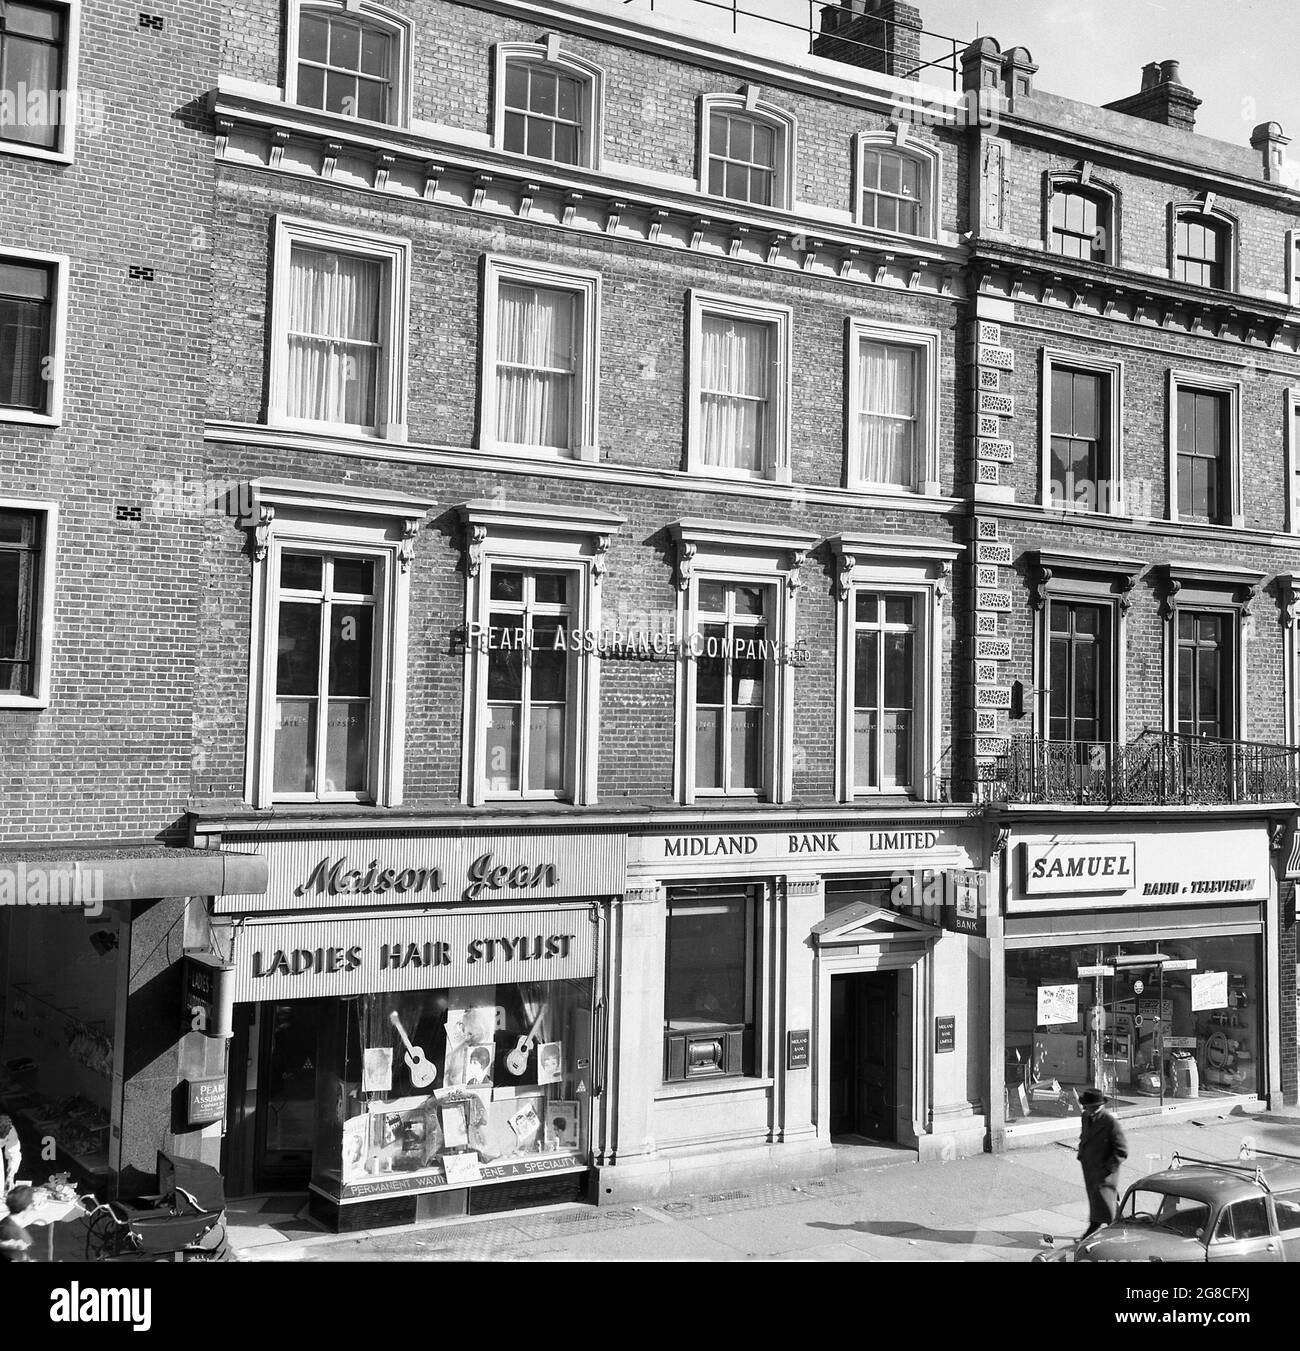 1960s, historical, a London high street of terraced victorian buildings with shops underneath, showing some of the retailers of the day; Maison Jean (Ladies Hair Stylist), Midland Bank ad Samuel (Radio & Television). All these are long gone. As is the Pearl Assurance Company Ltd (Life Assurance) whose name is shown over the first floor office windows and whose entrance is next to the hair dressers, where a pram of the era can be seen. Handwritten notice in the window of Samuel, saying 'Switch now for 625', in reference to new television sets having higher definition 625 PAL lines Stock Photo